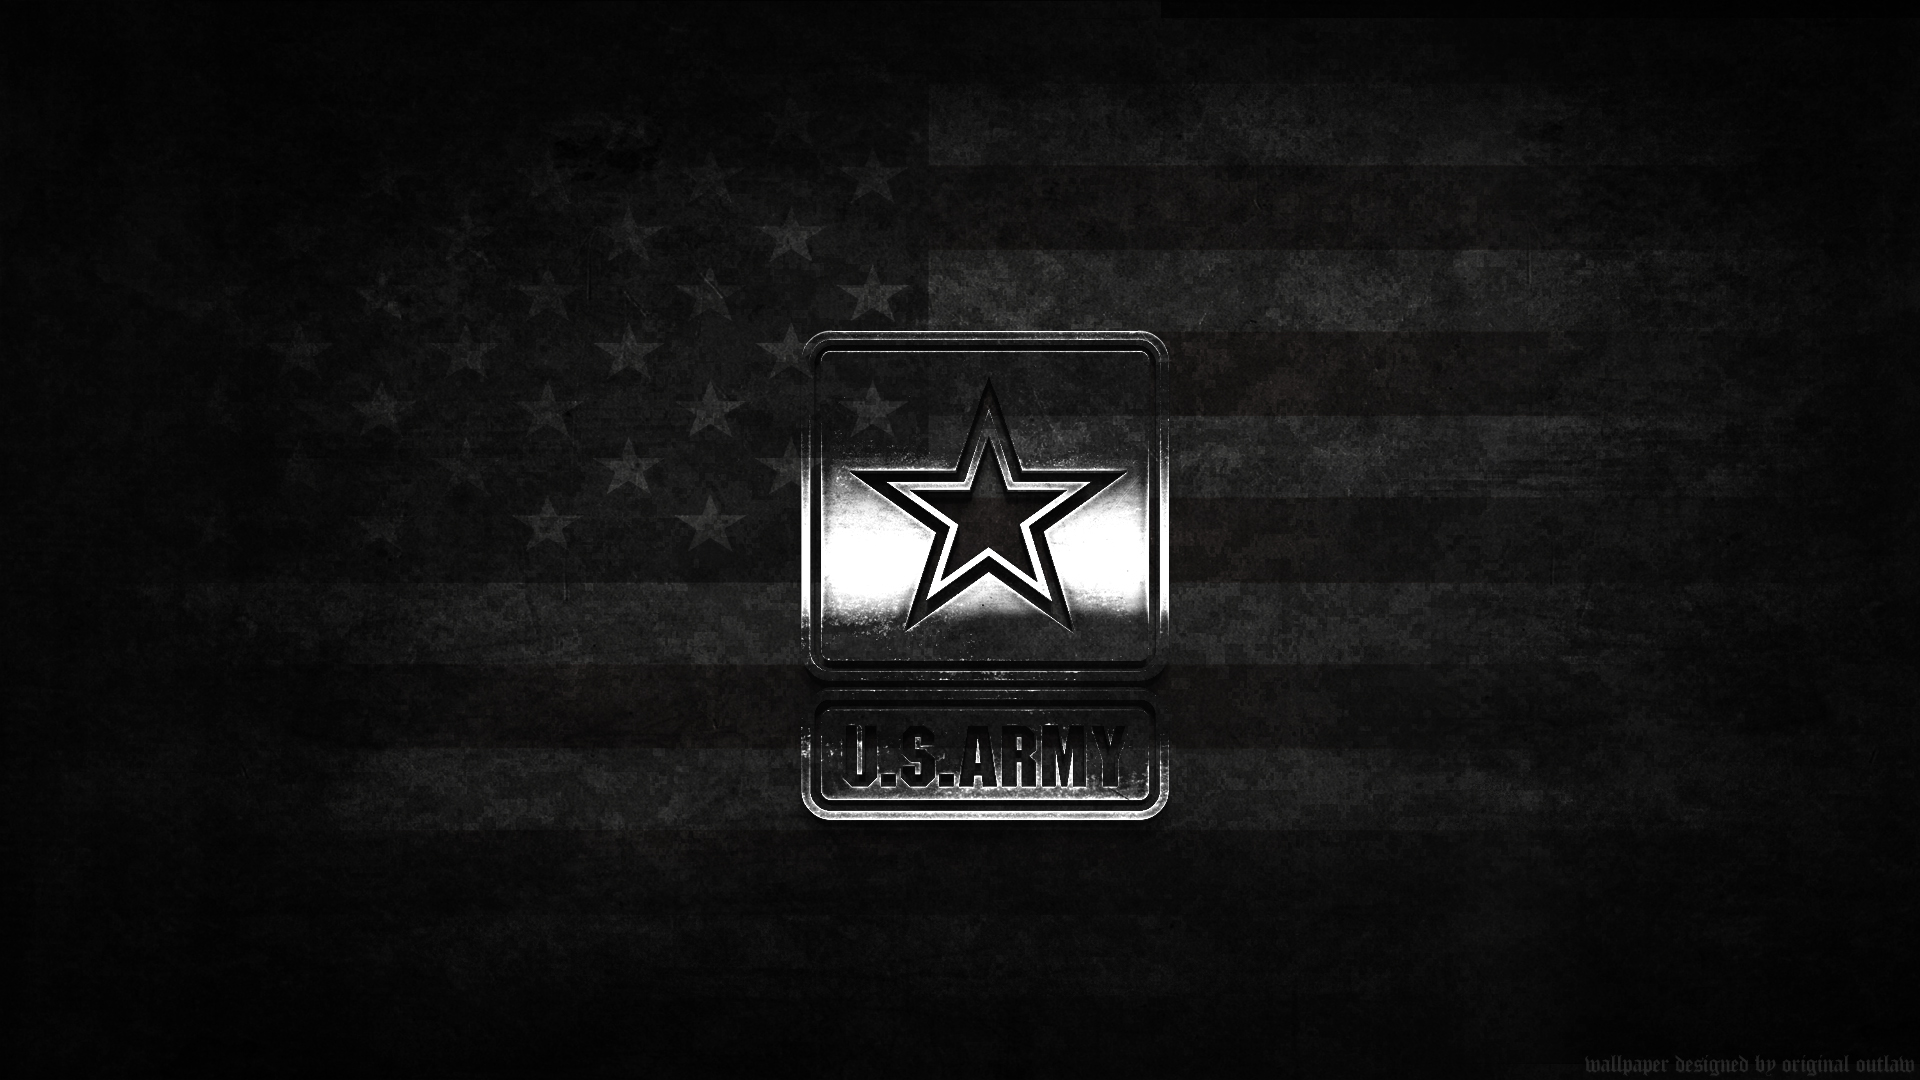 Us Army Background Submited Image